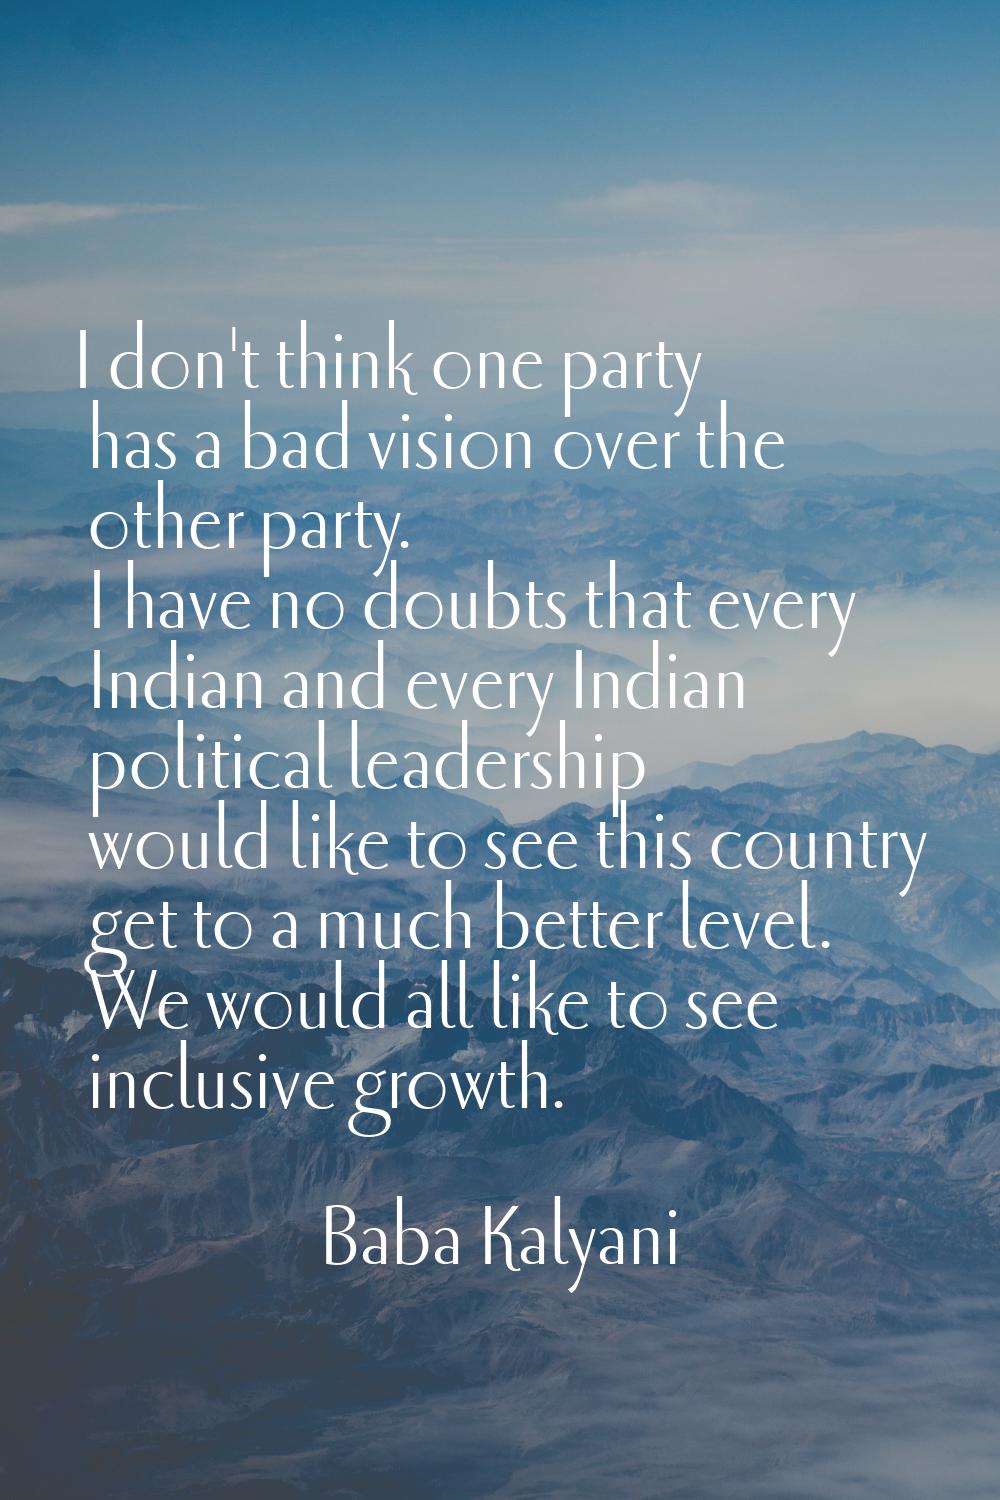 I don't think one party has a bad vision over the other party. I have no doubts that every Indian a